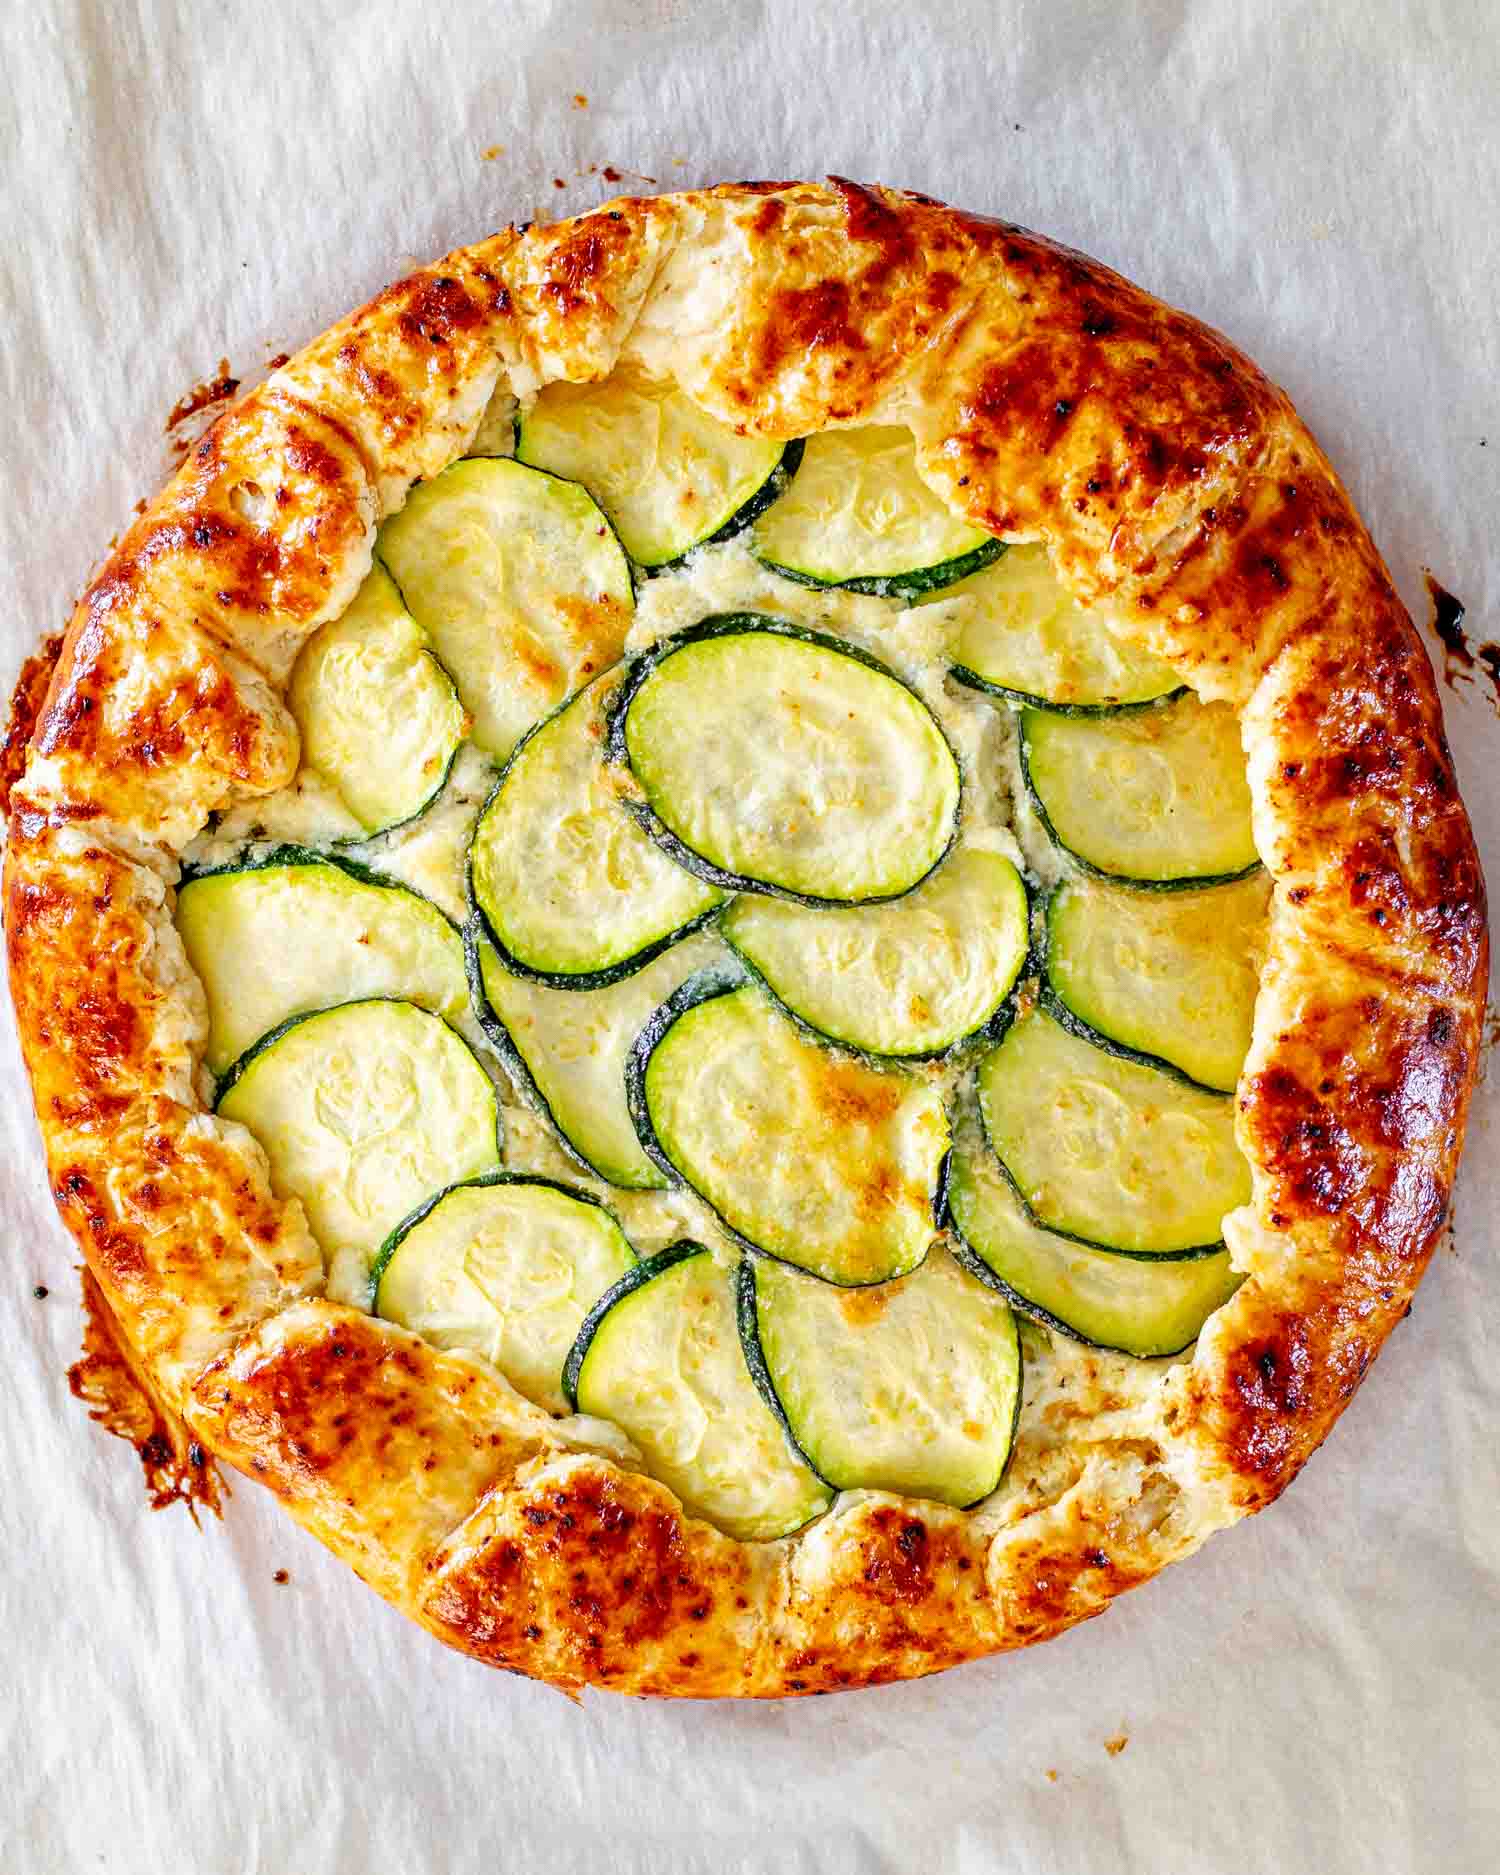 a fresh out of the oven zucchini ricotta galette on a baking sheet lined with parchment paper.